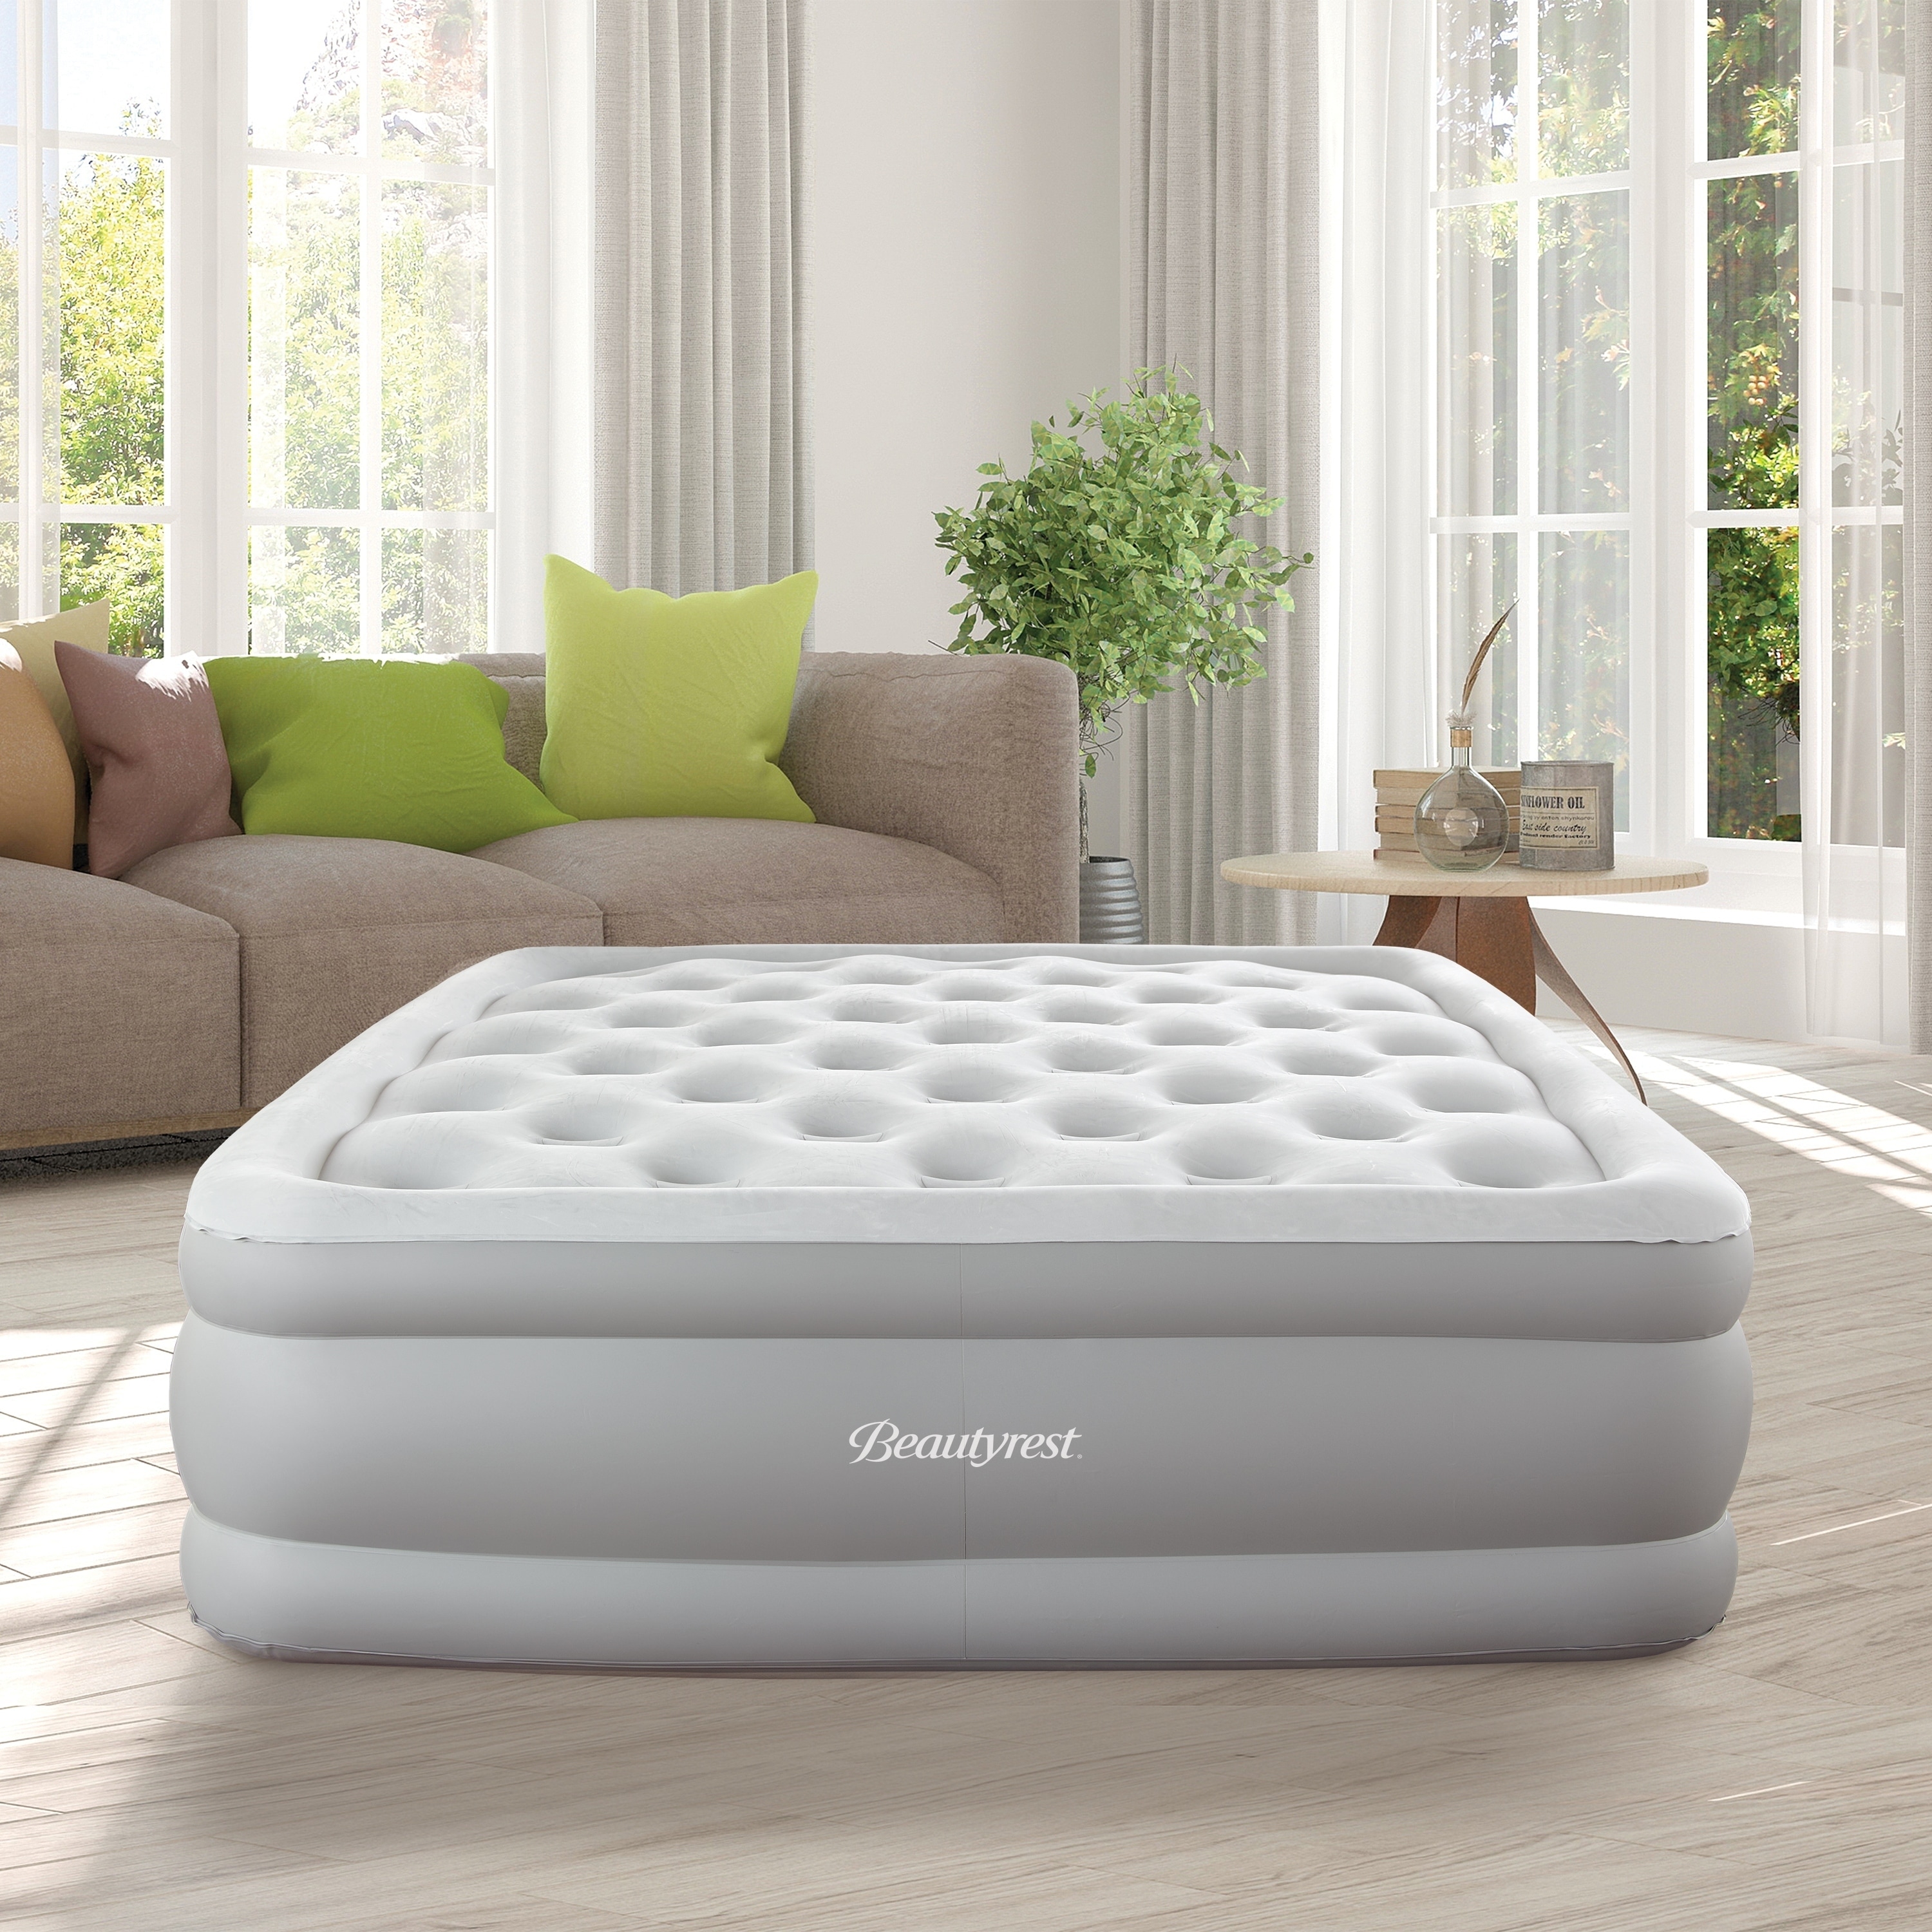 https://ak1.ostkcdn.com/images/products/27221145/Beautyrest-Sky-Rise-16-inch-Full-Size-Adjustable-Comfort-Coil-Top-Raised-Air-Bed-Mattress-with-Edge-Support-and-Express-Pump-cf4cb86b-7d29-4694-a109-abec0e31440a.jpg